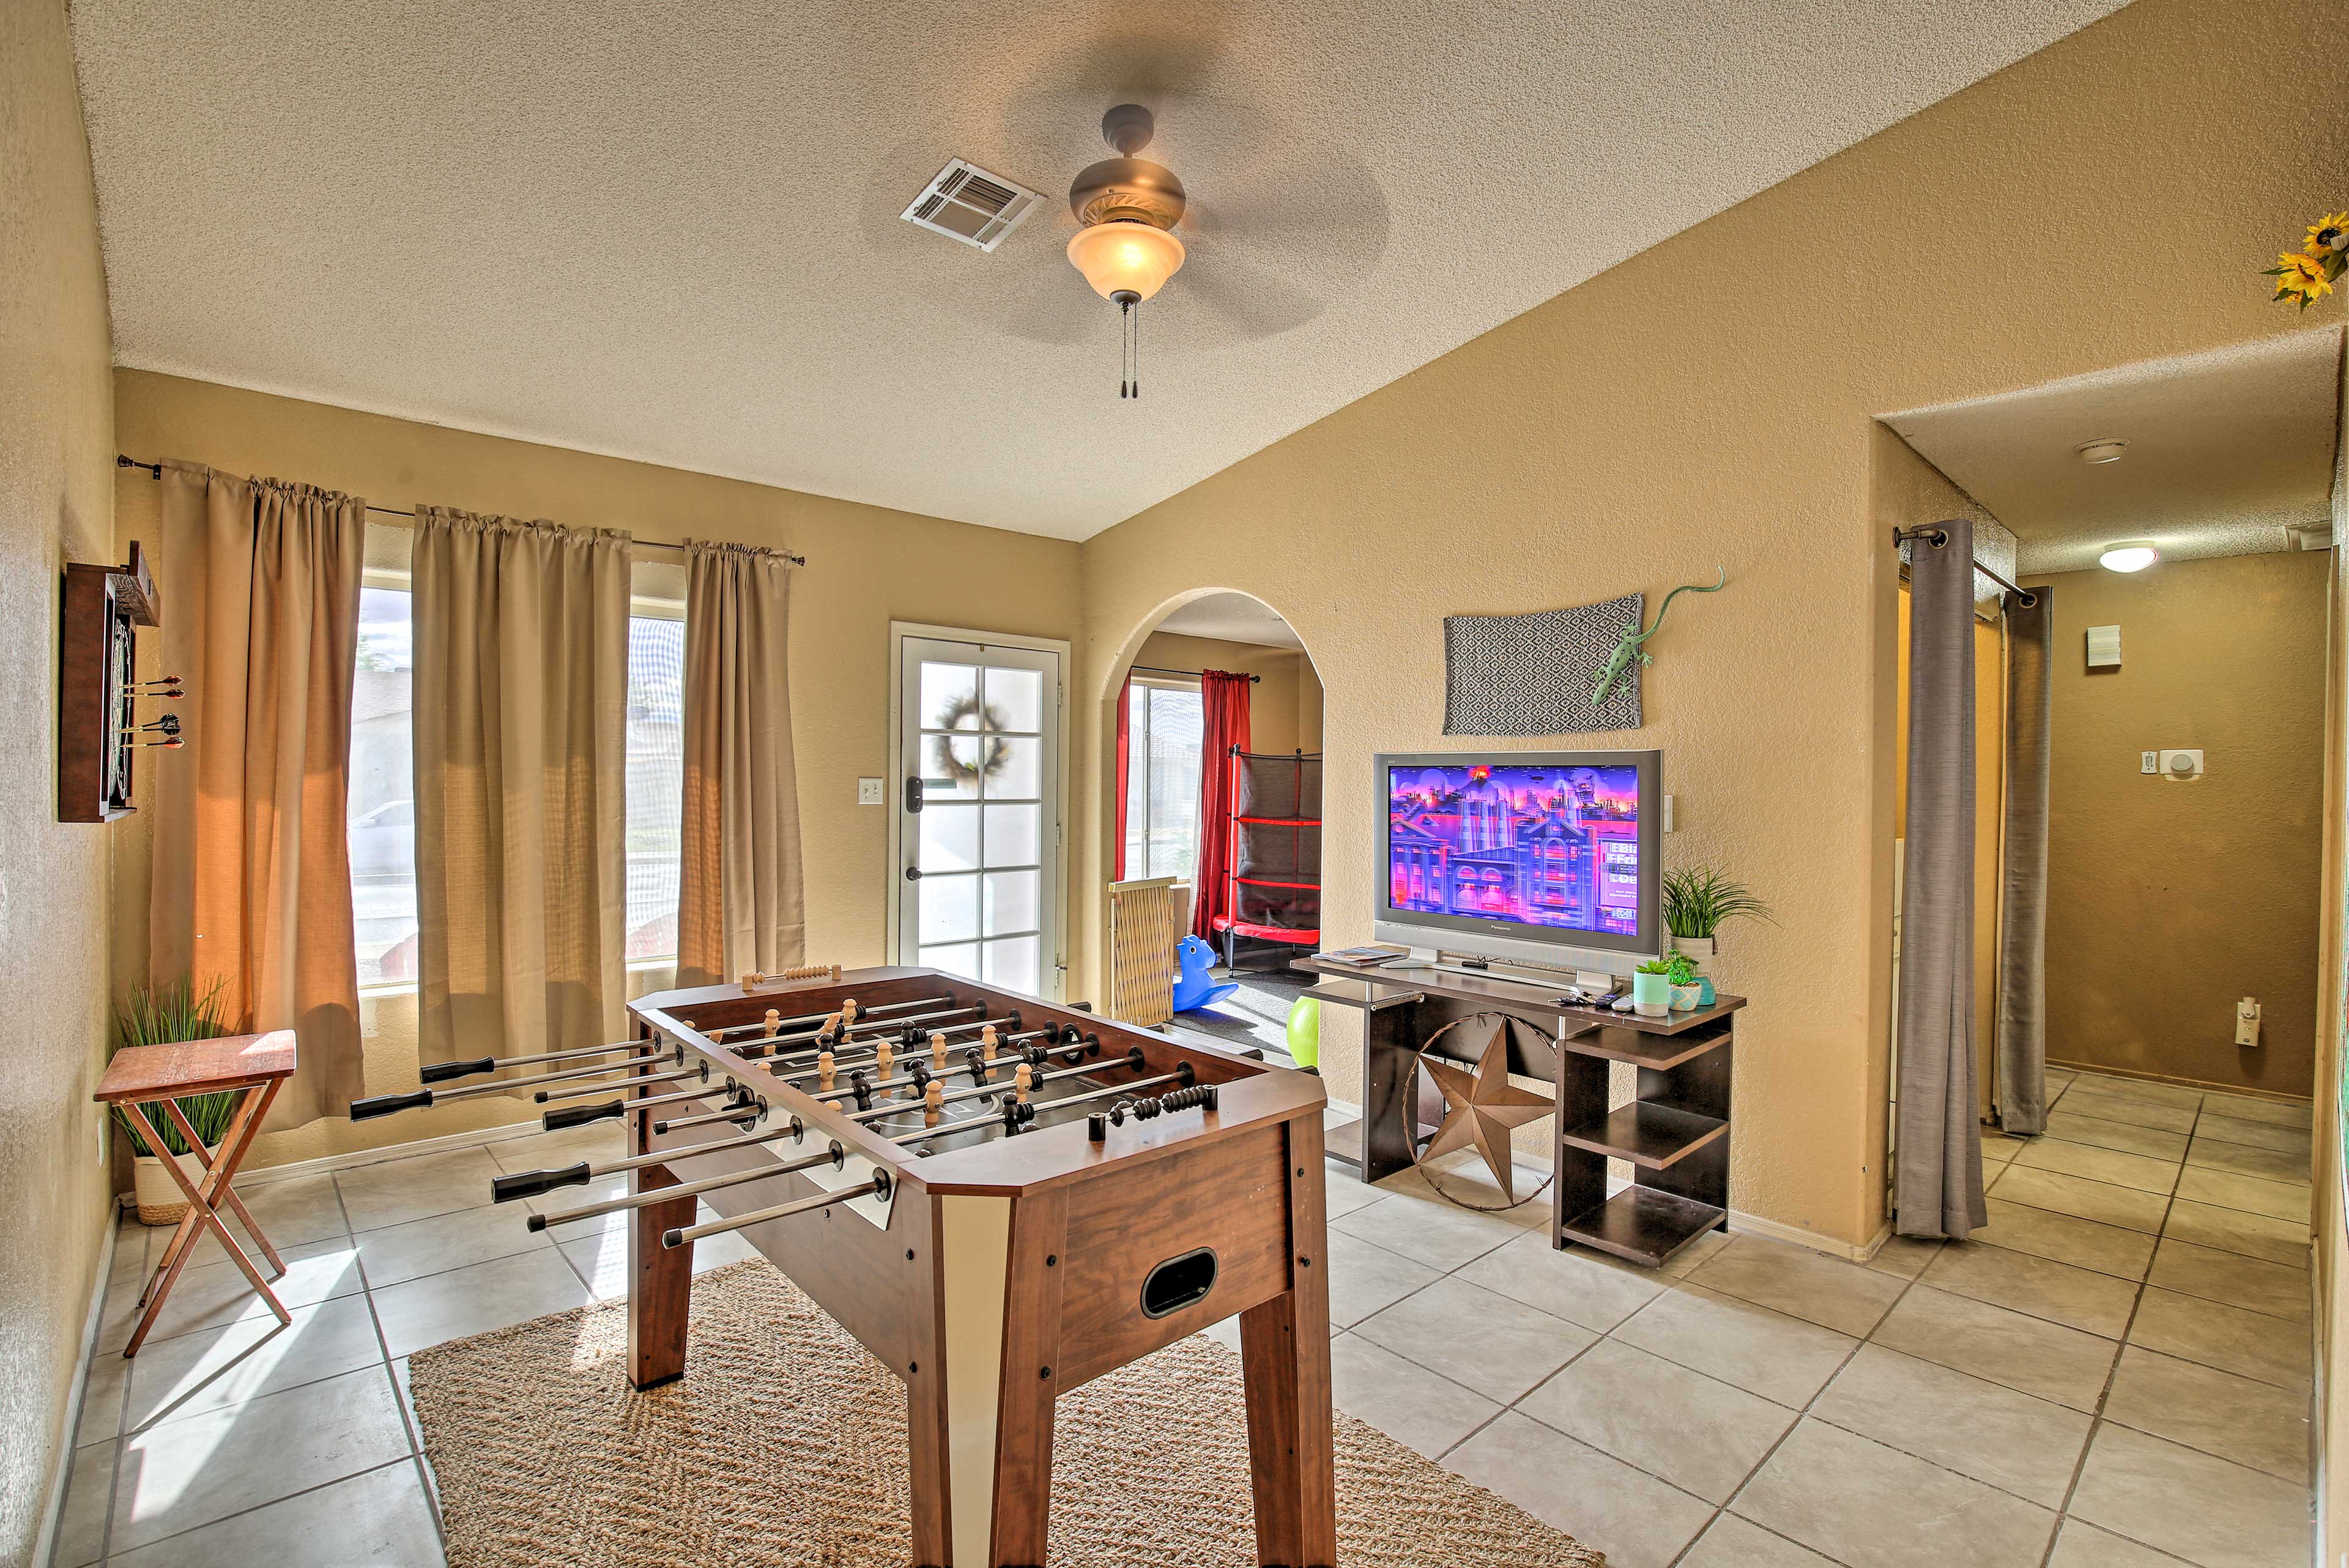 Play foosball and watch movies on the TV after your adventures.